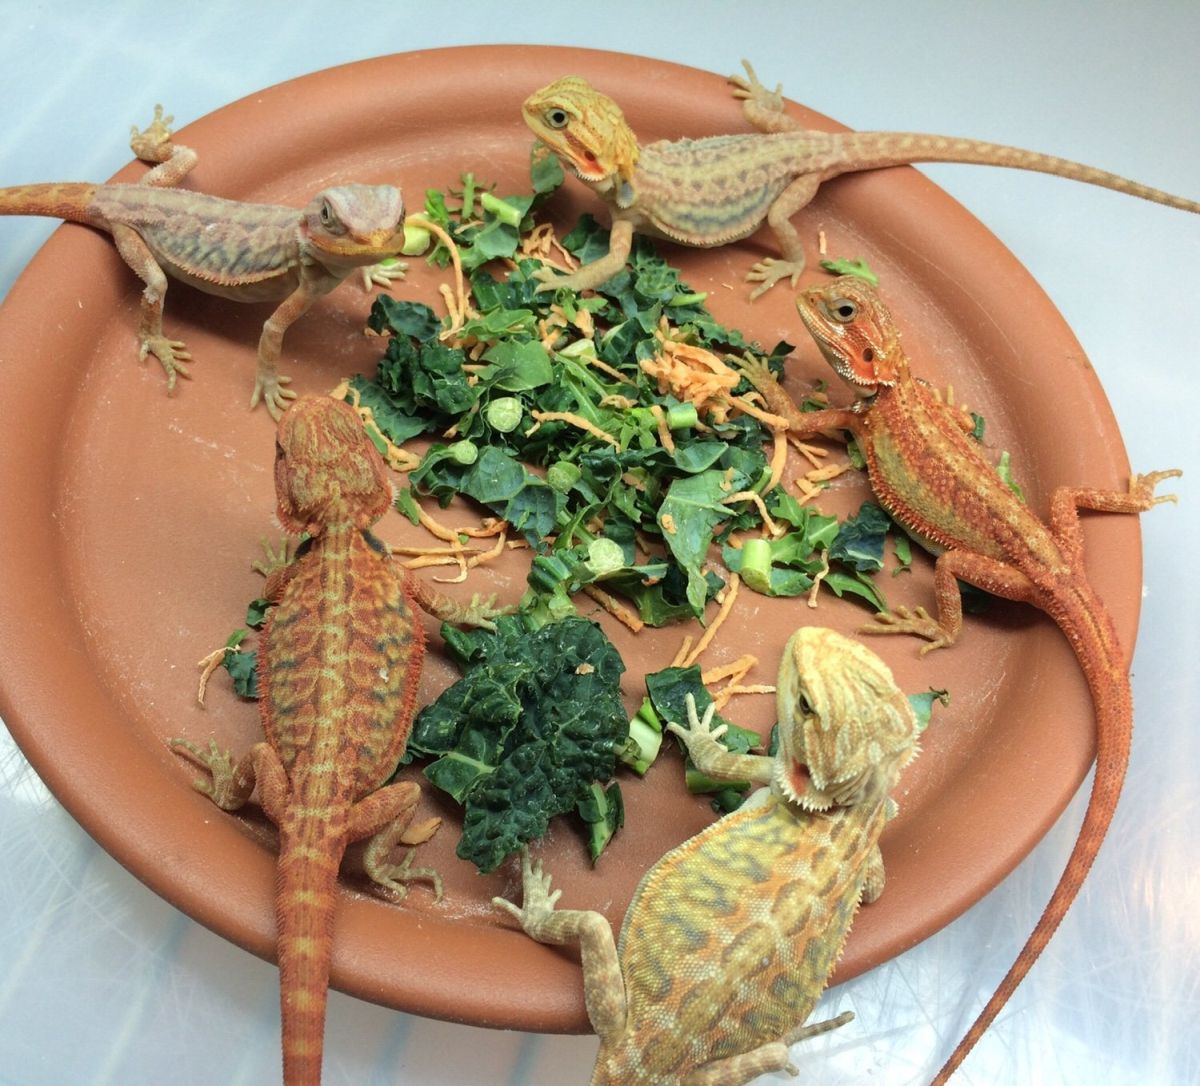 What Do Baby Lizards Eat? How to Feed Young Pet Lizards